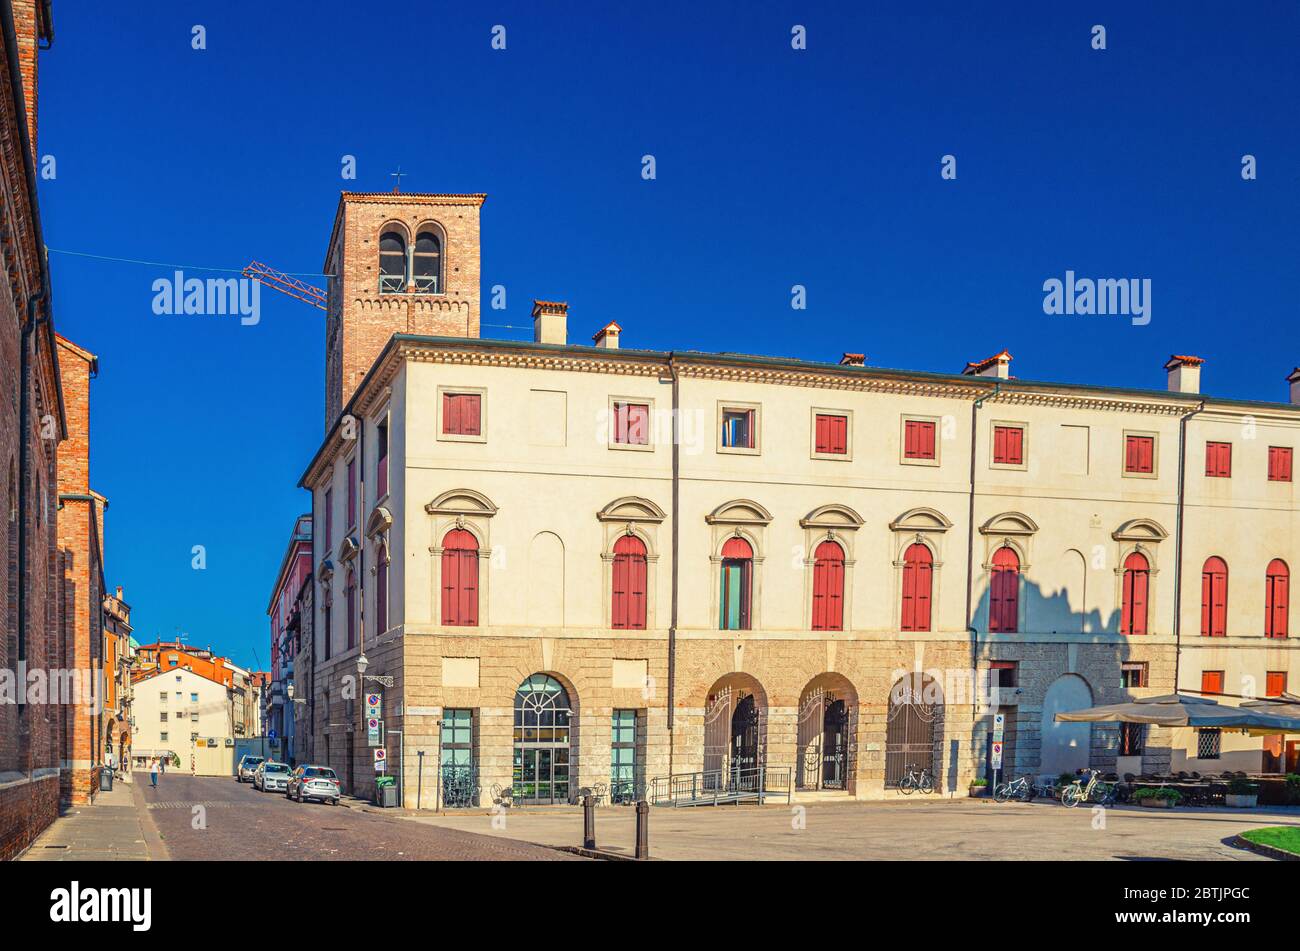 Palazzo delle Opere Sociali palace building with brick tower in Piazza del Duomo square in old historical city centre of Vicenza city, blue sky background, Veneto region, Italy Stock Photo